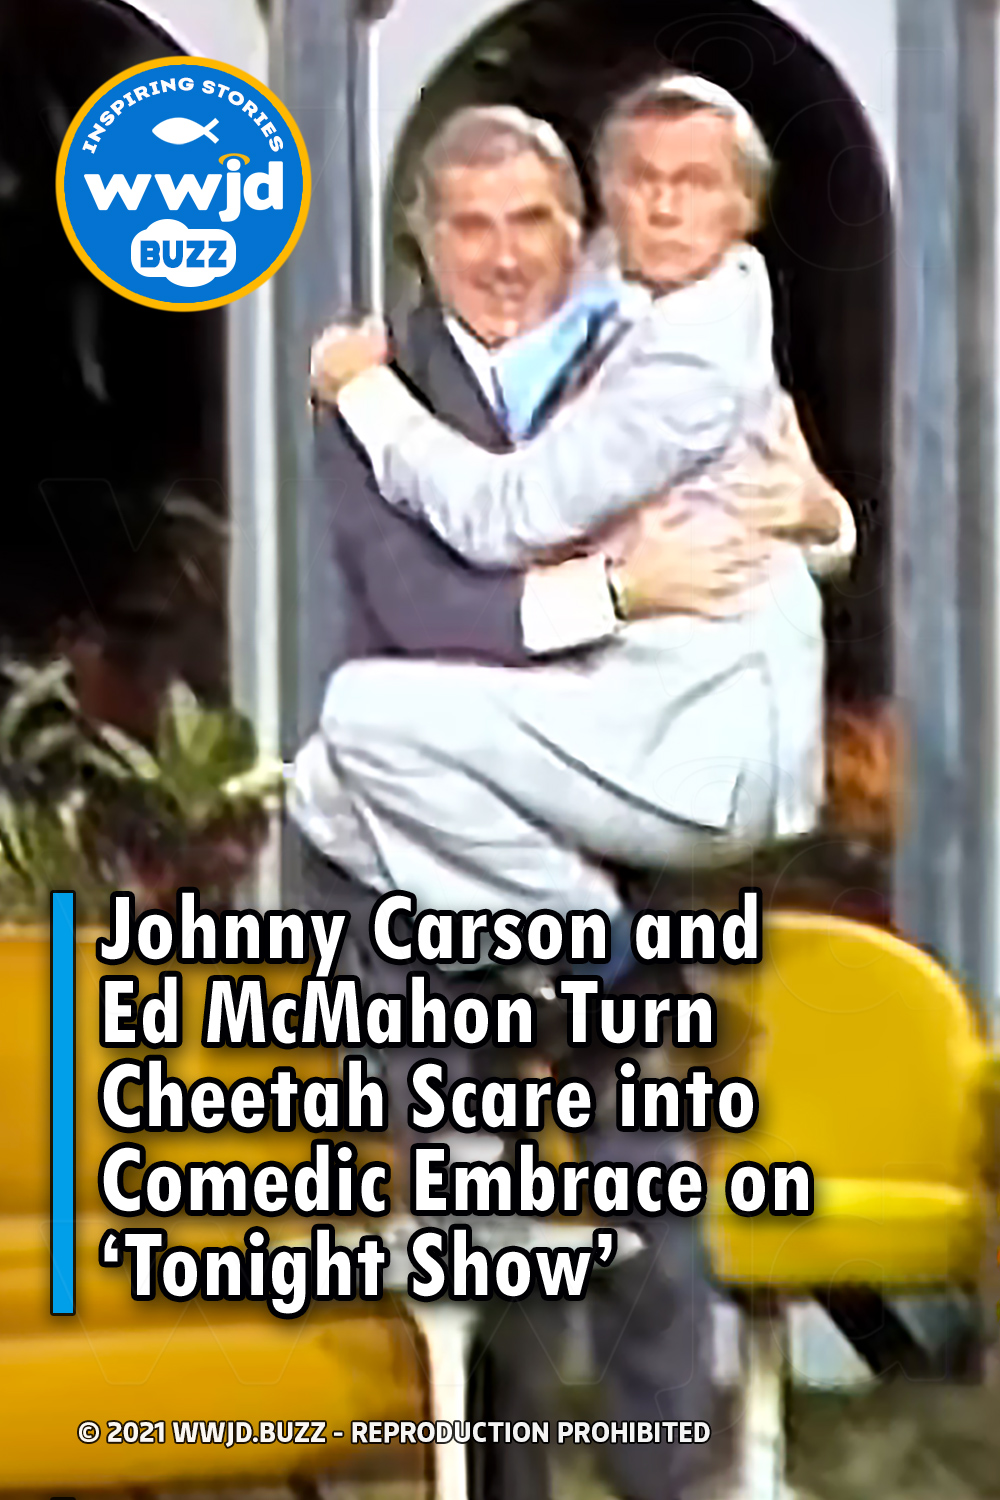 Johnny Carson and Ed McMahon Turn Cheetah Scare into Comedic Embrace on ‘Tonight Show’